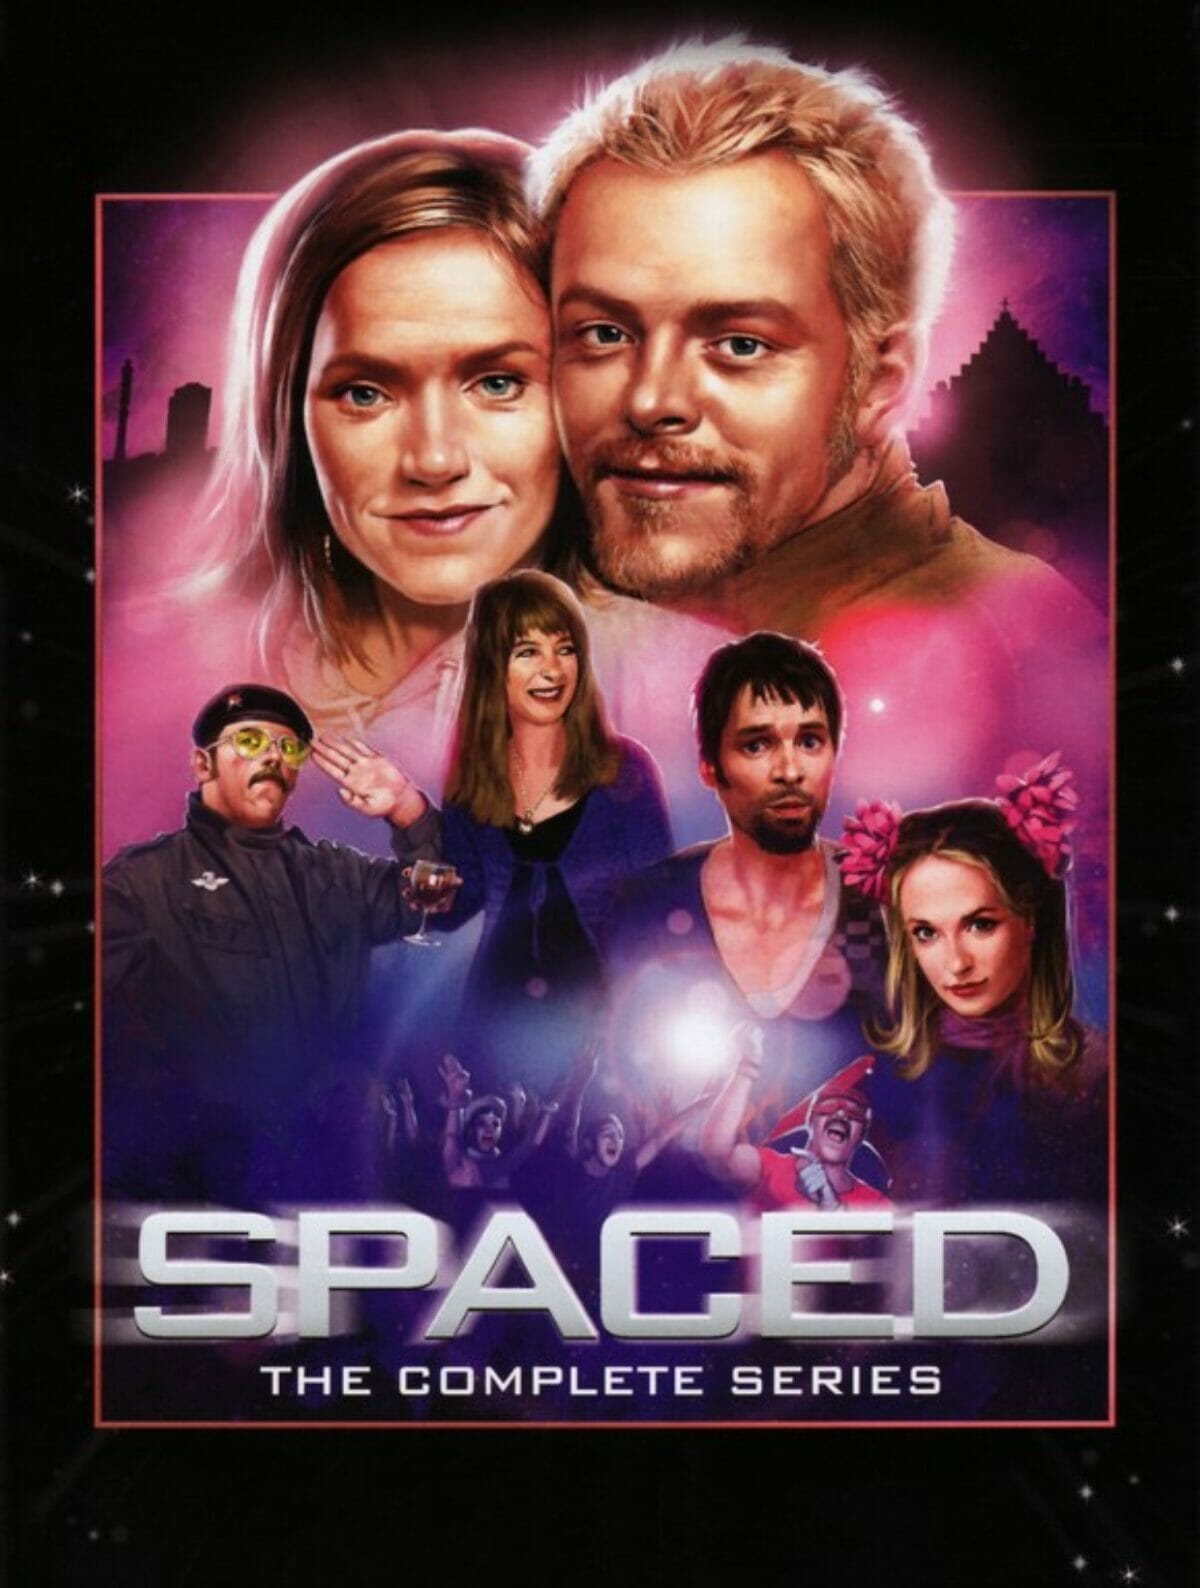 spaced-dvd-cover